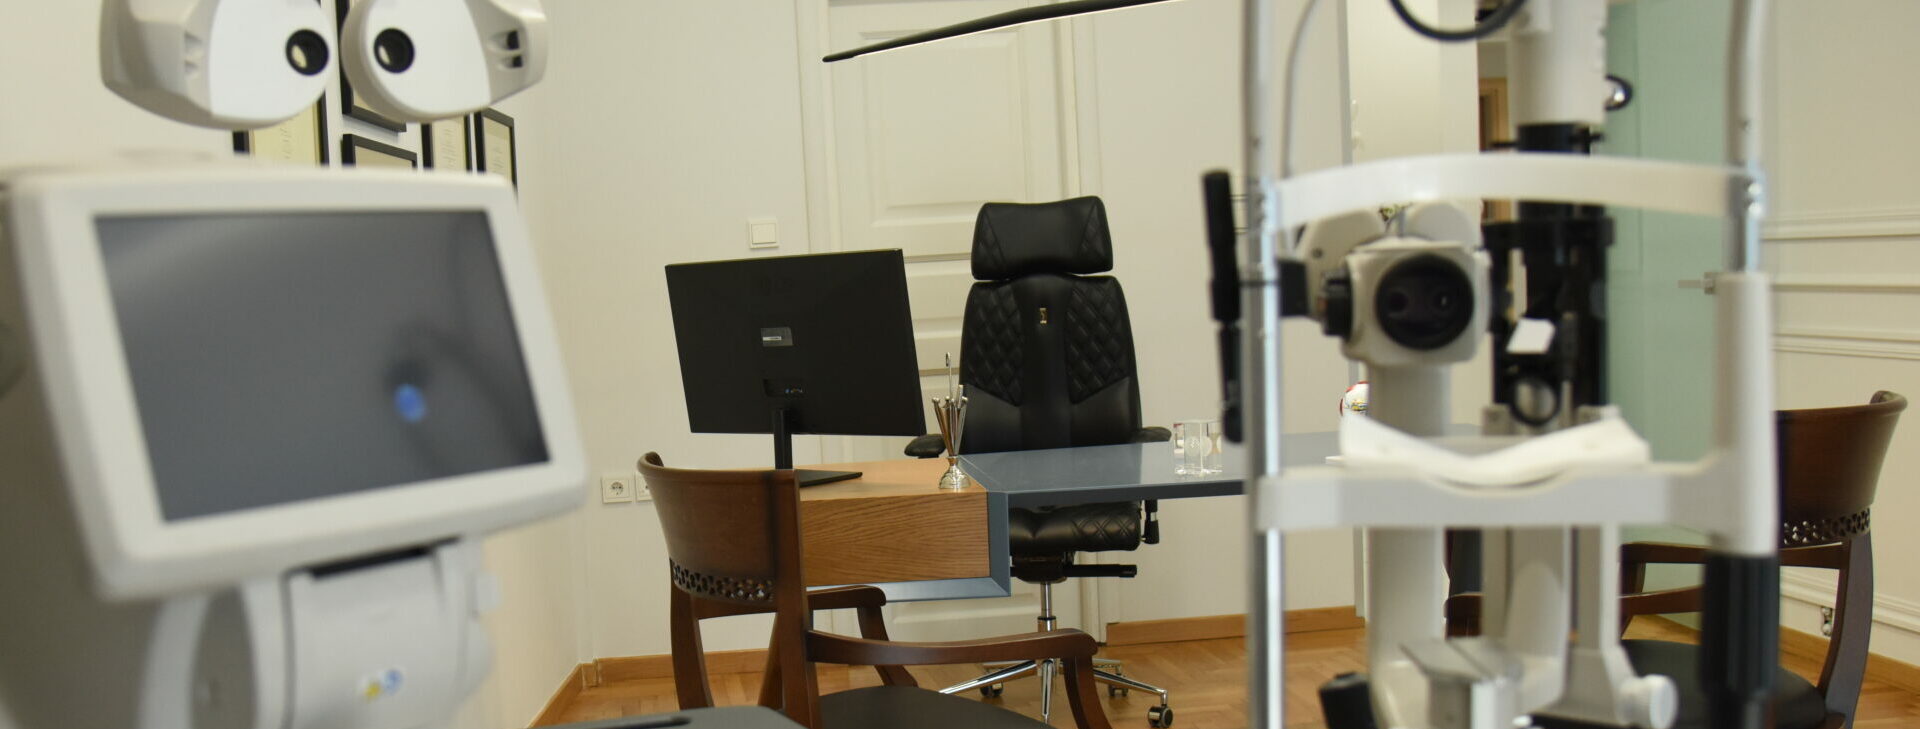 Ophthalmological equipment photo